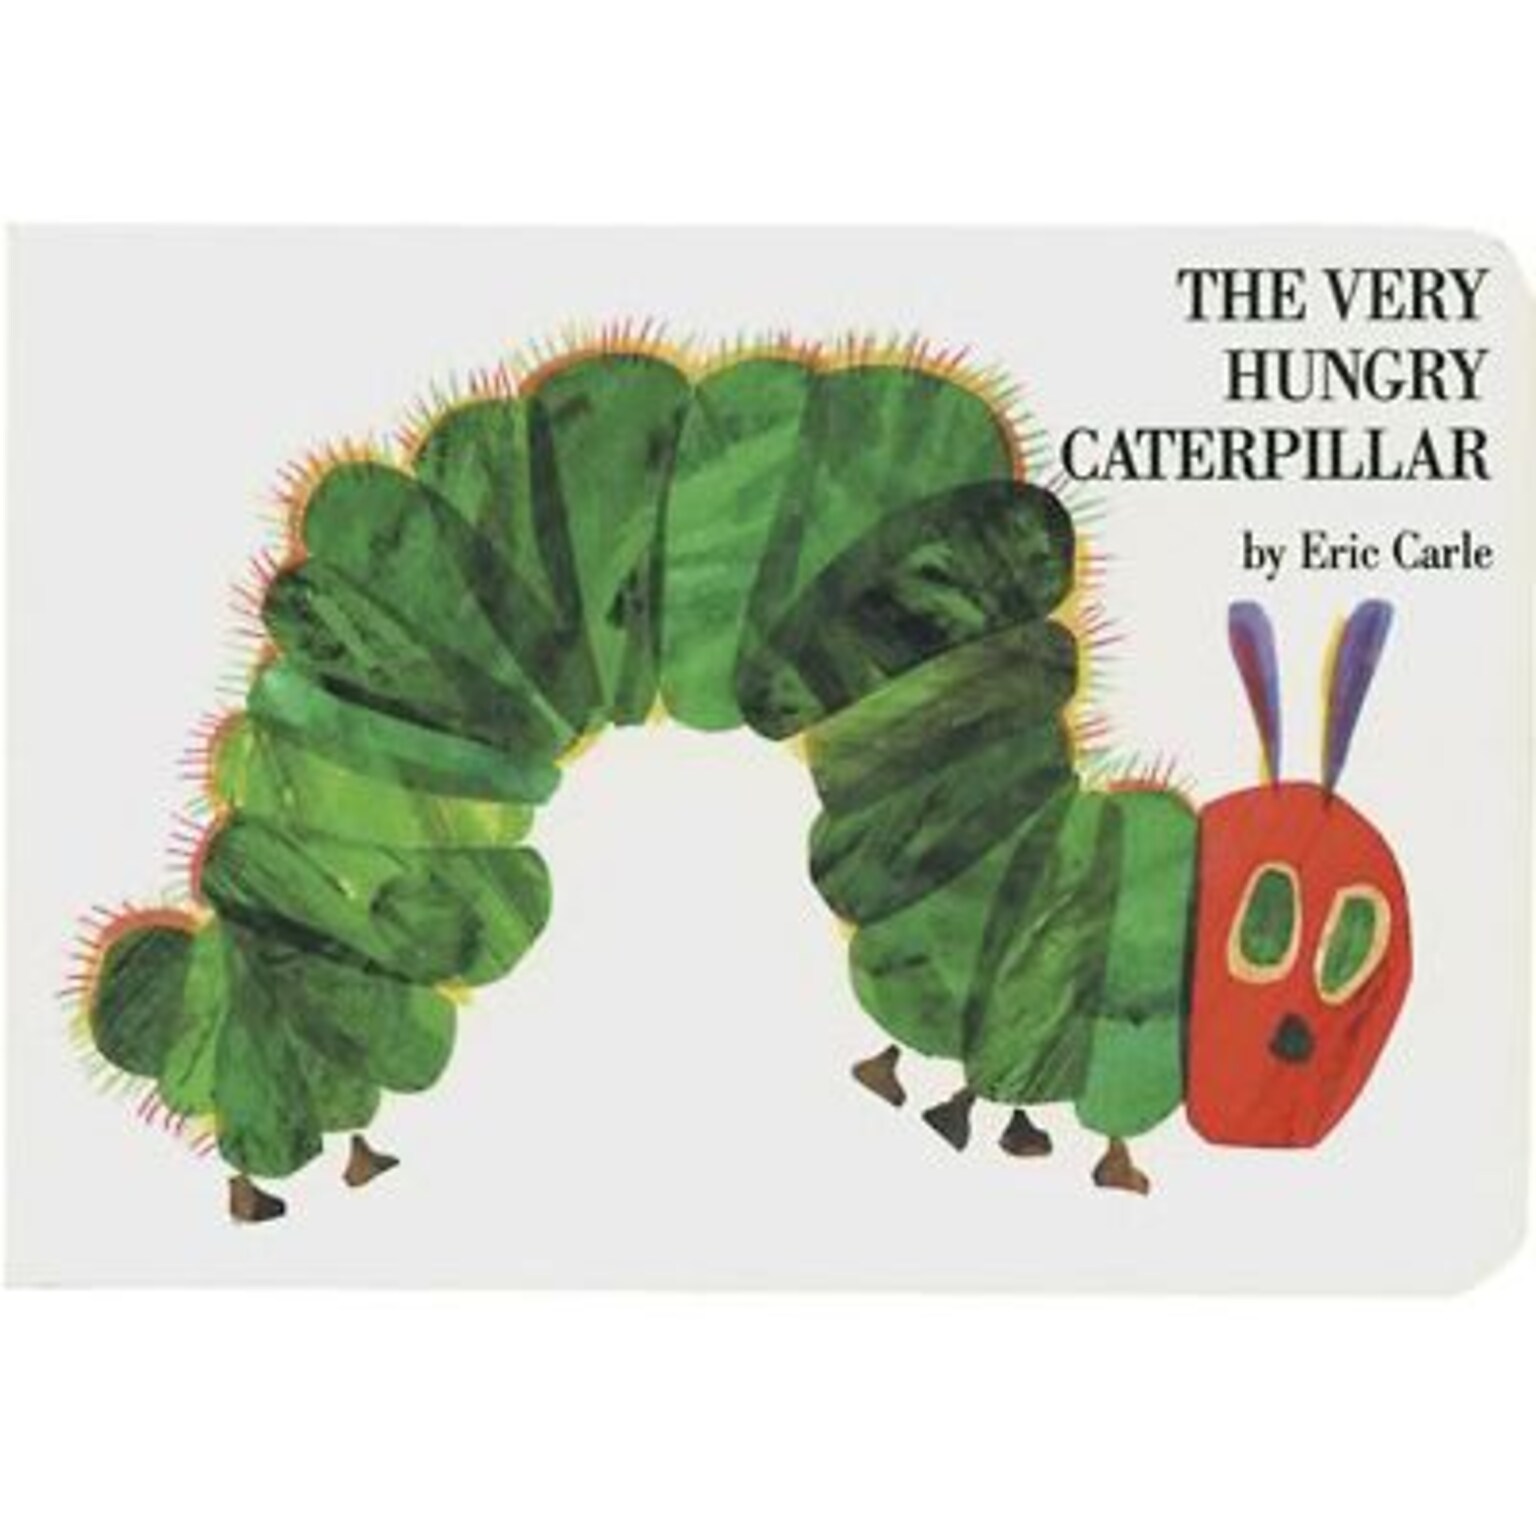 Penguin The Very Hungry Caterpillar Childrens Book By Eric Carle, Grades Pre-school - 3rd (ING0399208534)